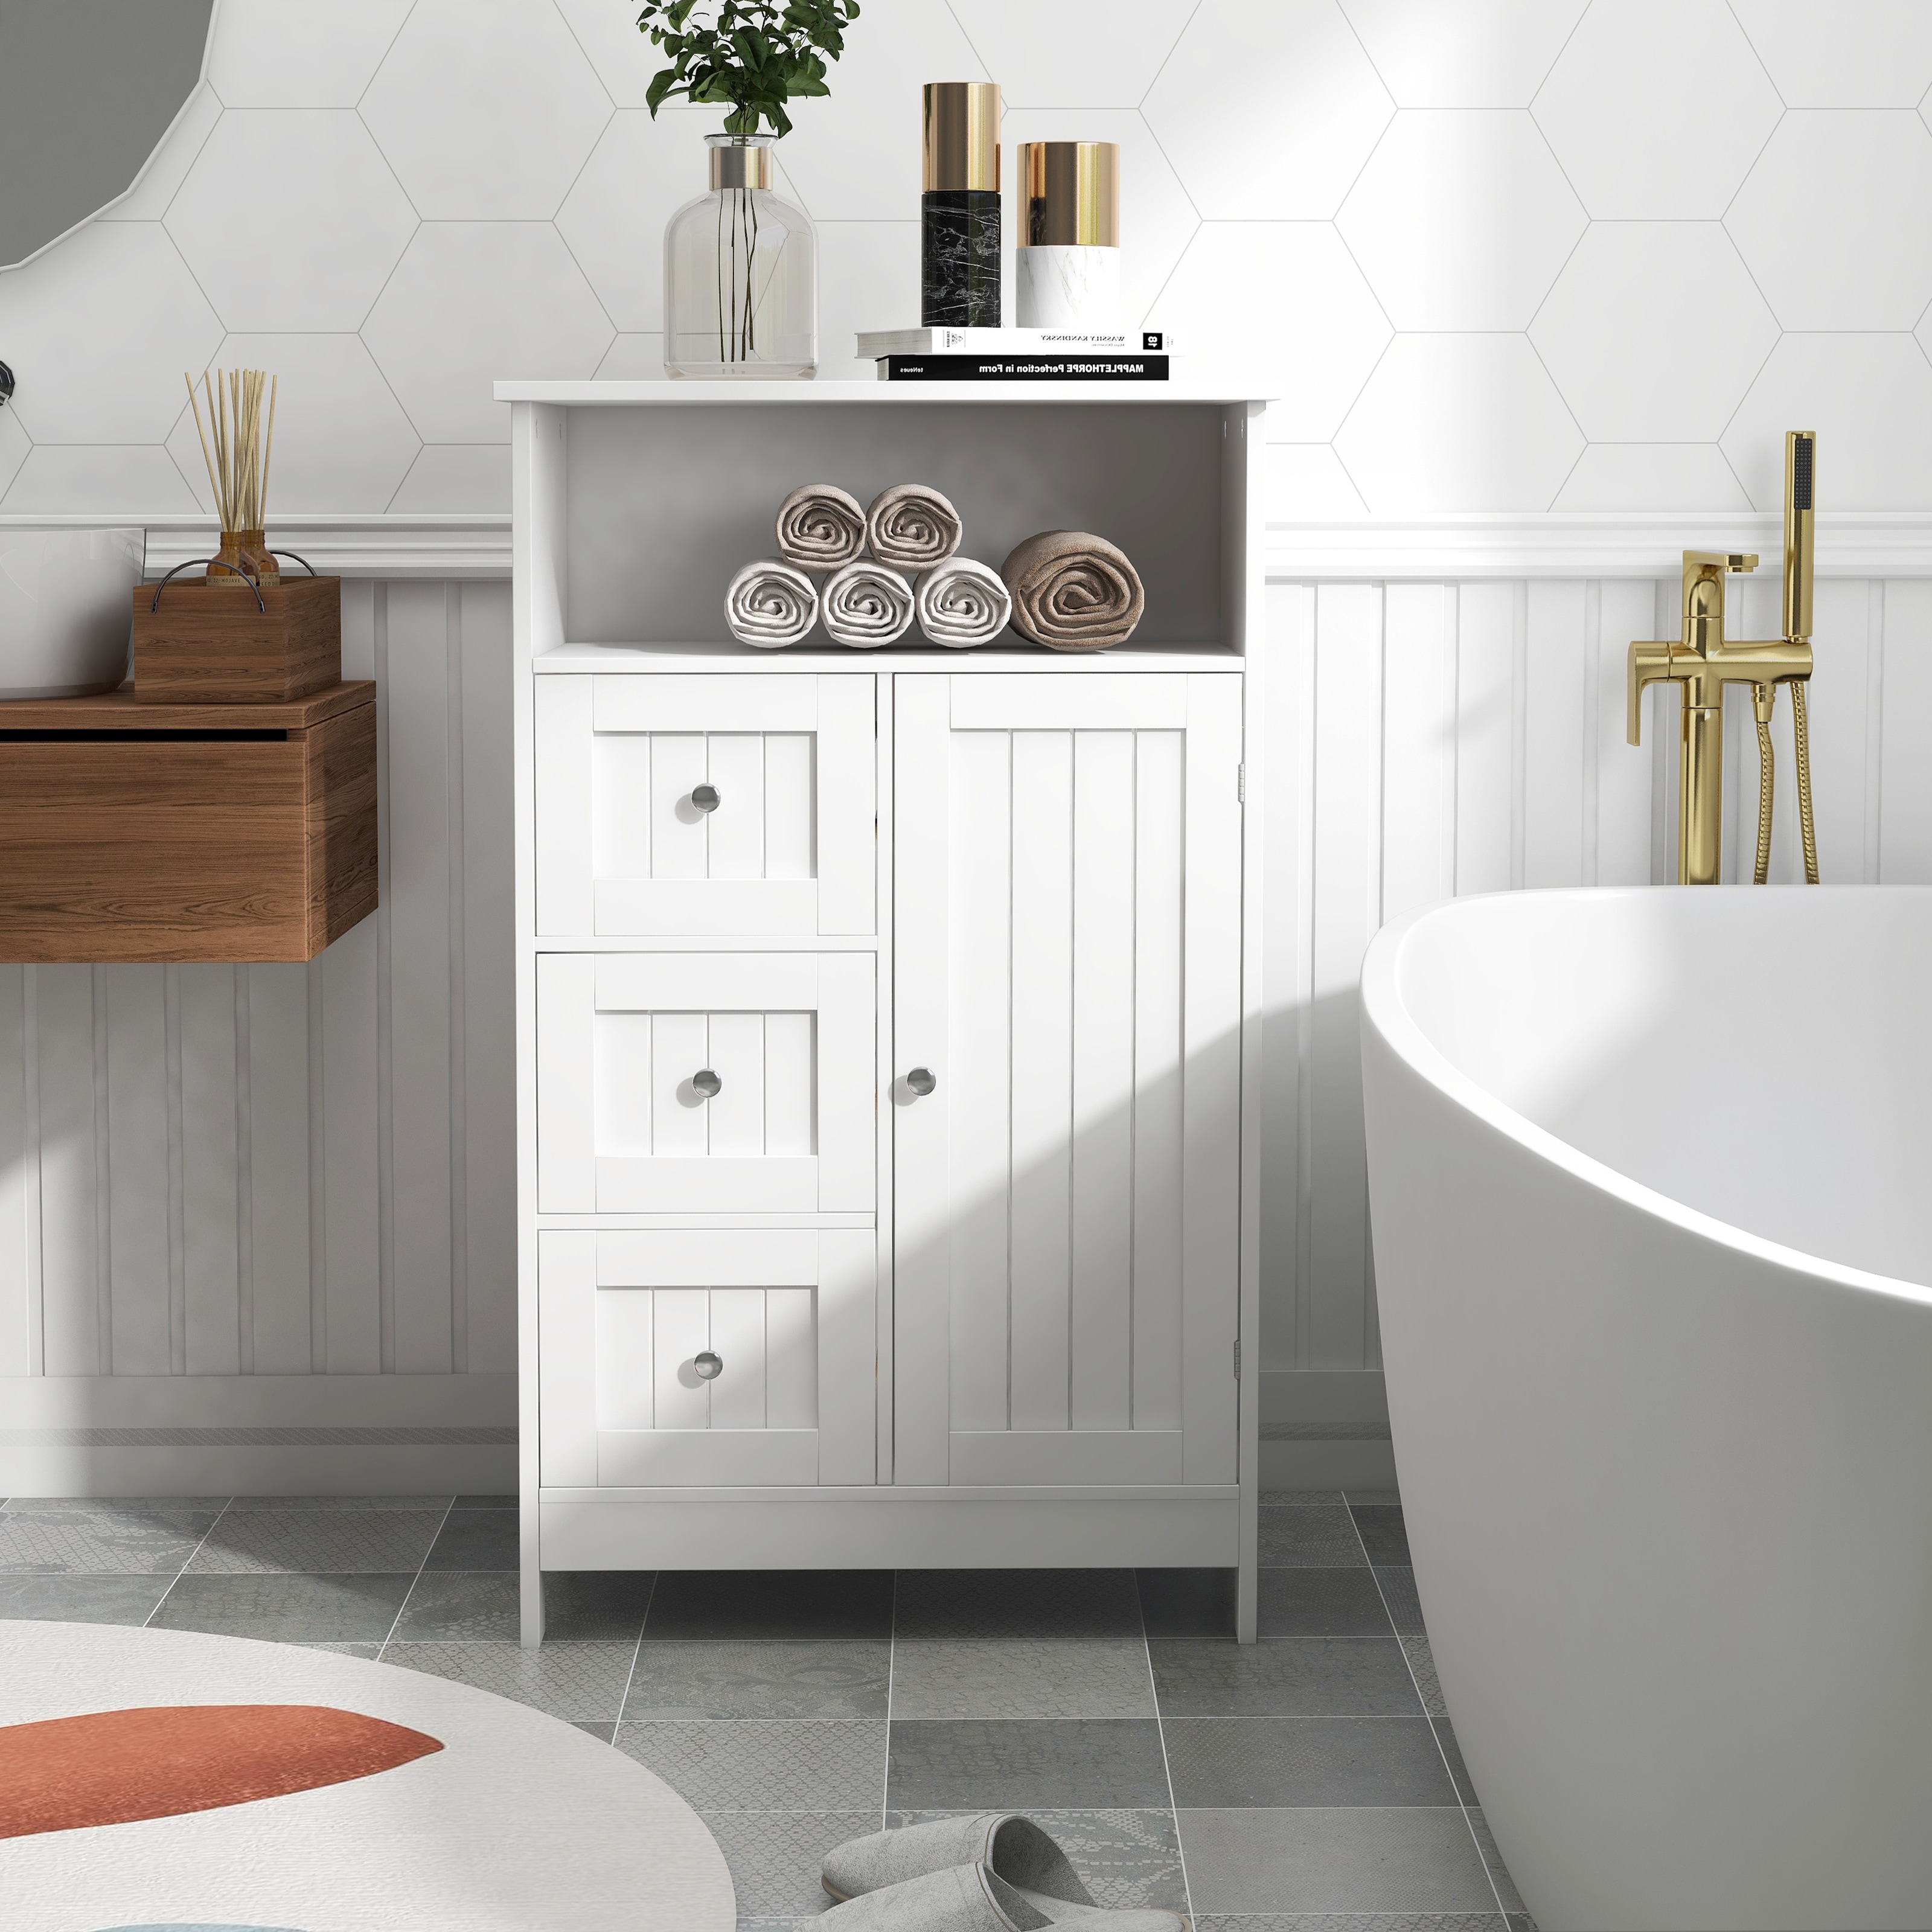 https://ak1.ostkcdn.com/images/products/is/images/direct/2387560c9b9835b92339a8796ba625e2855693c1/White-Bathroom-Storage-Floor-Cabinet-with-Pull-out-Drawers-and-Door-for-Entryway-Storage-Organizer-Kitchen-Pantry-Cabinet.jpg